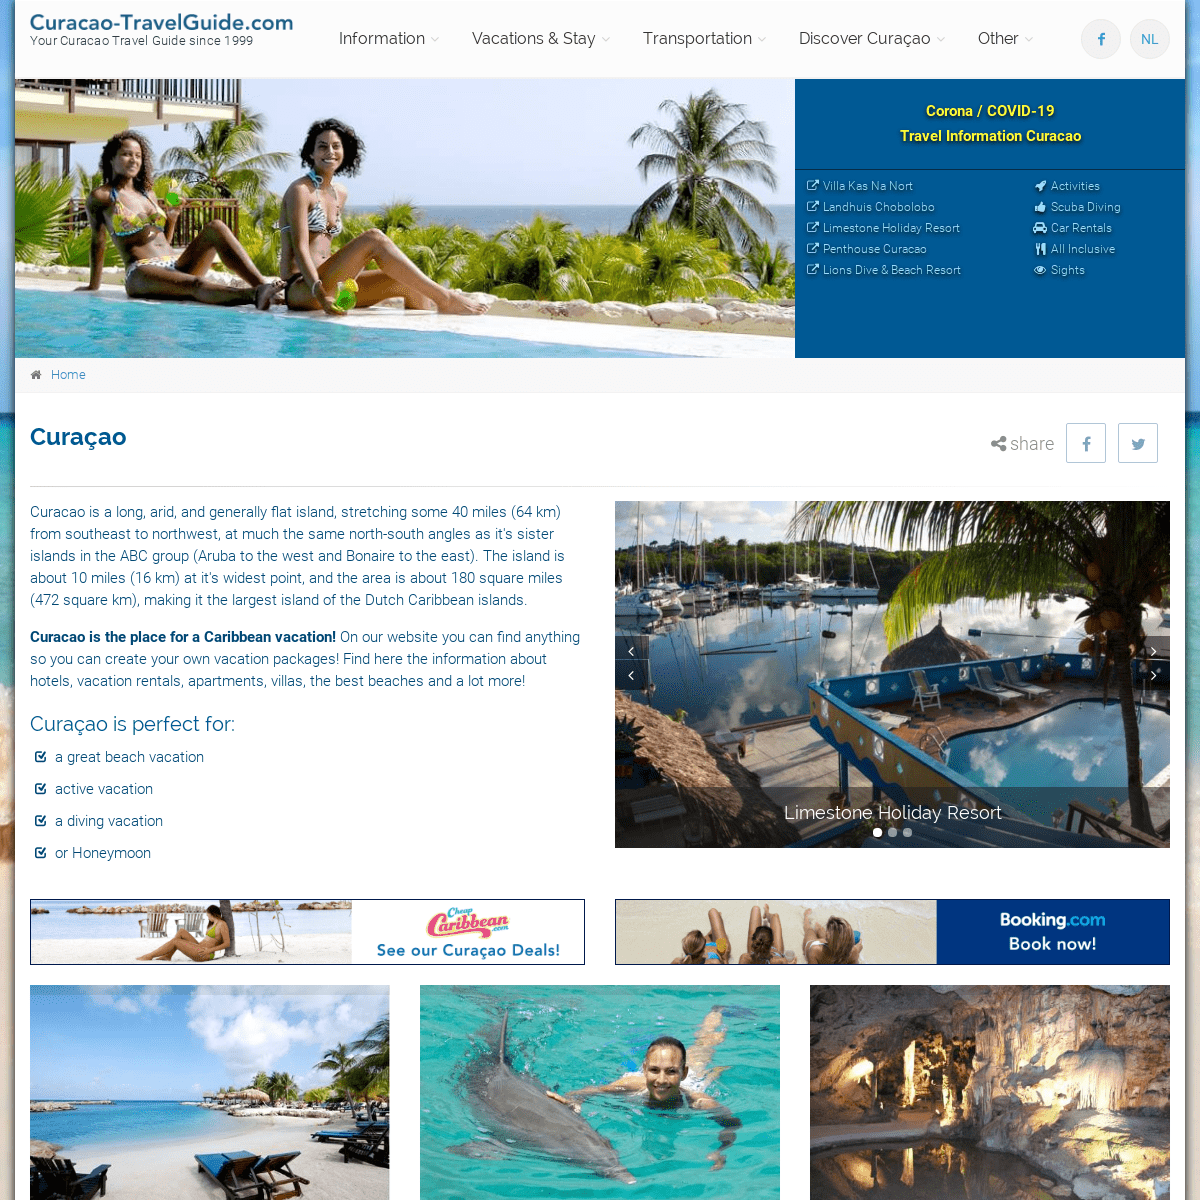 A complete backup of https://curacao-travelguide.com